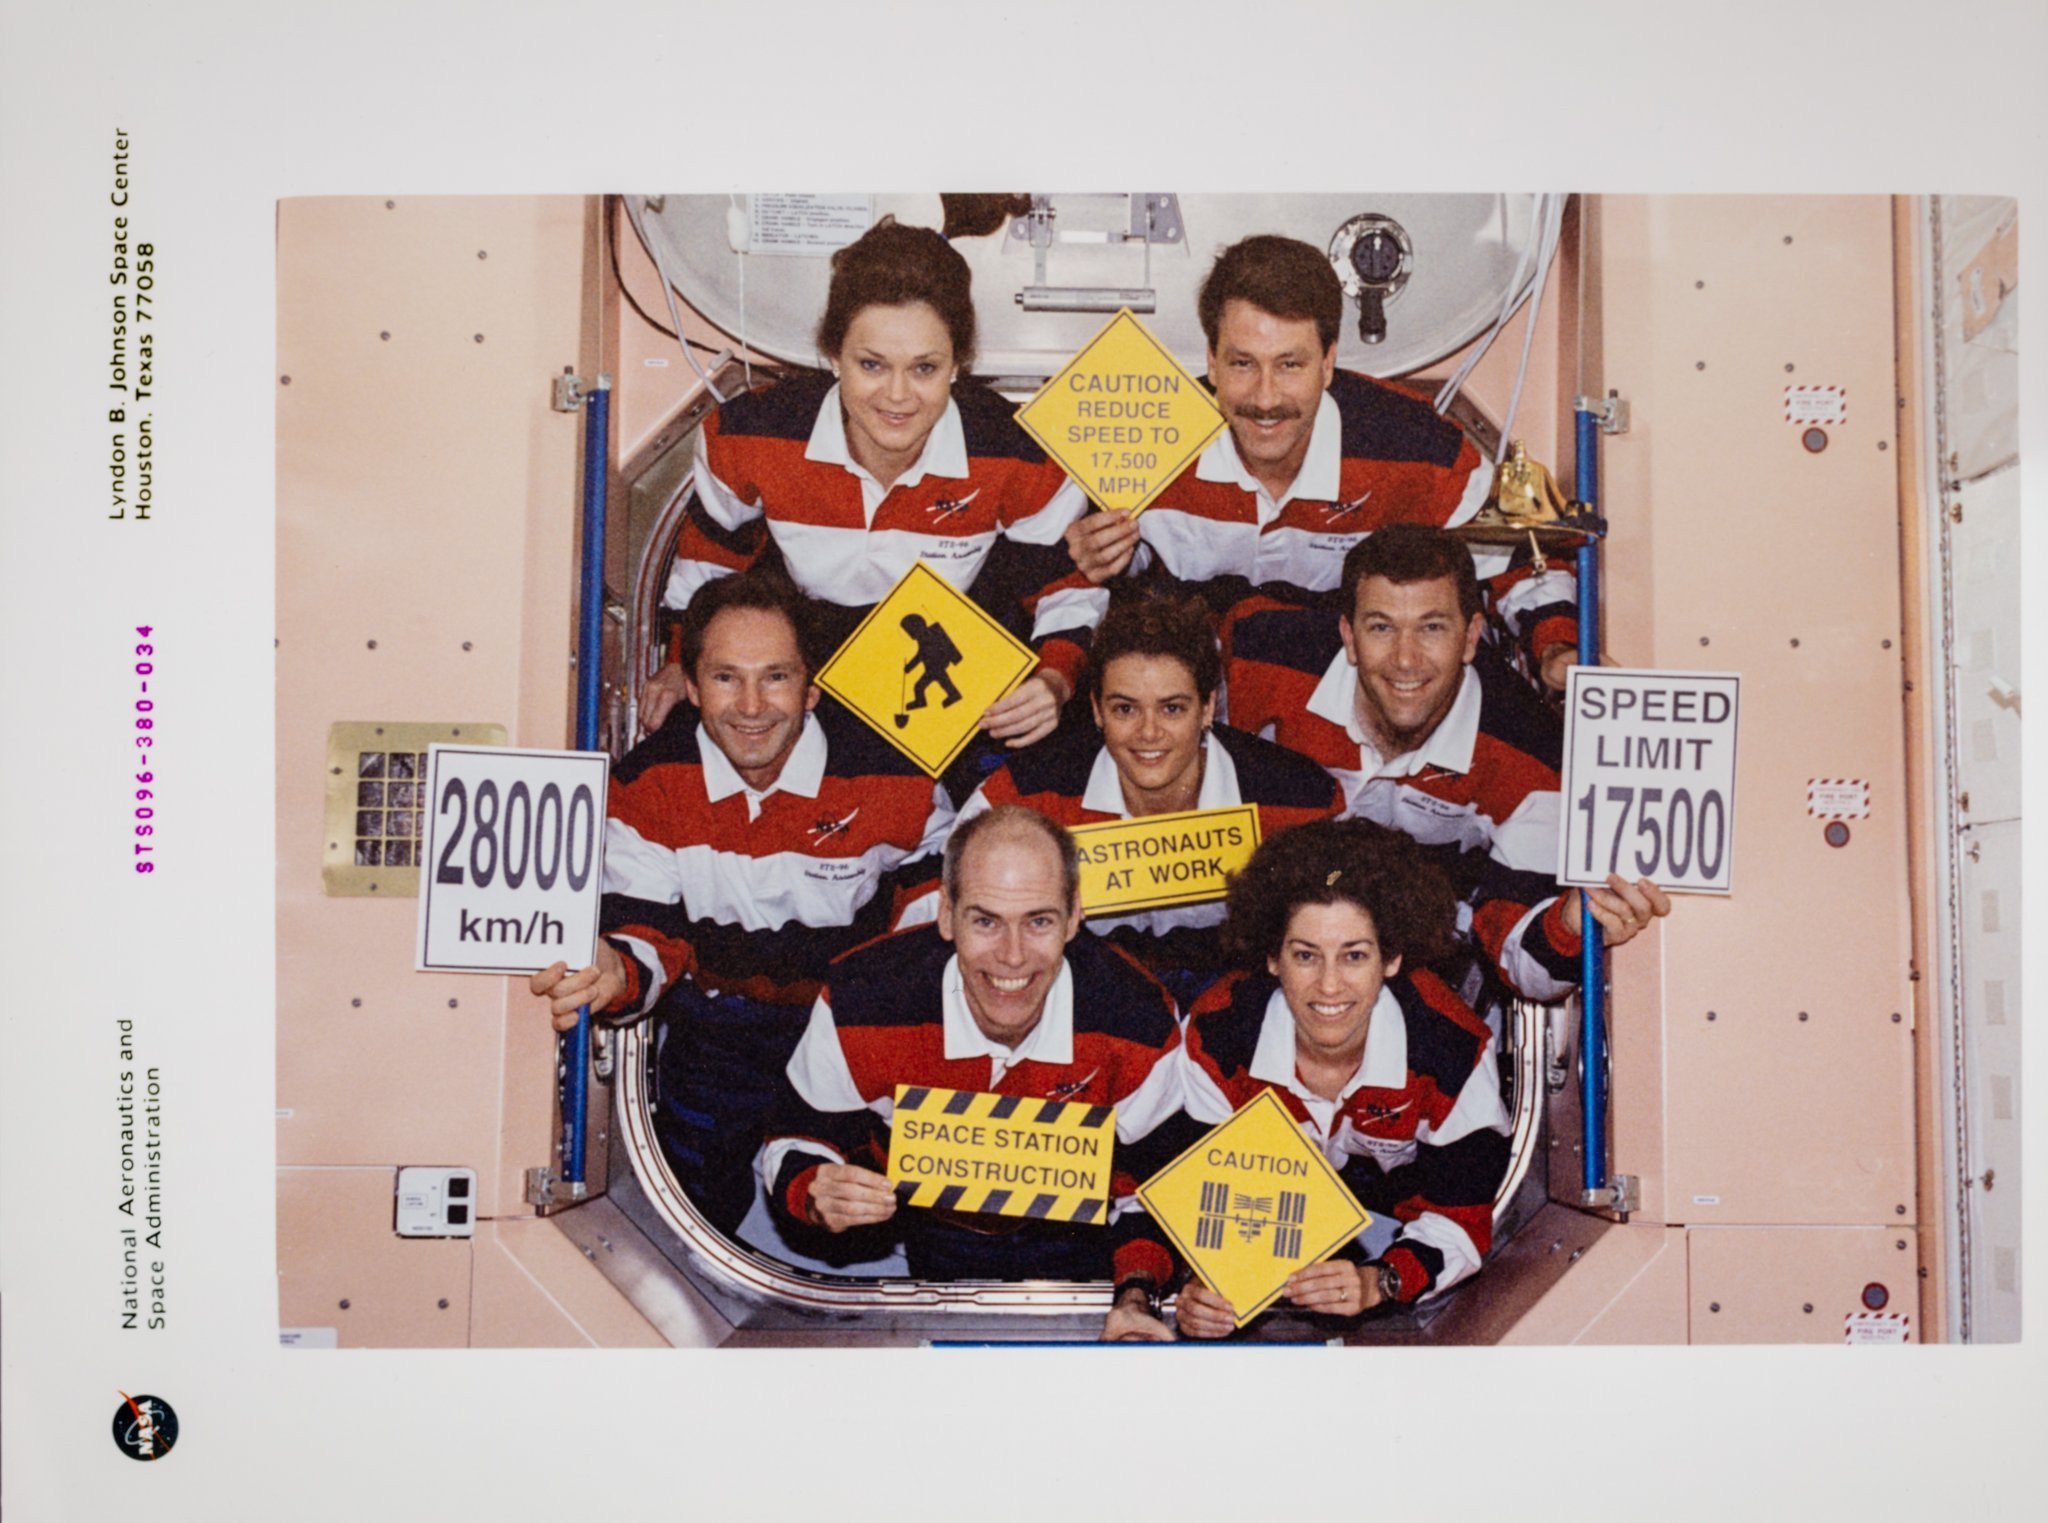 Crew of STS-96 (Space Shuttle Discovery) in 1999